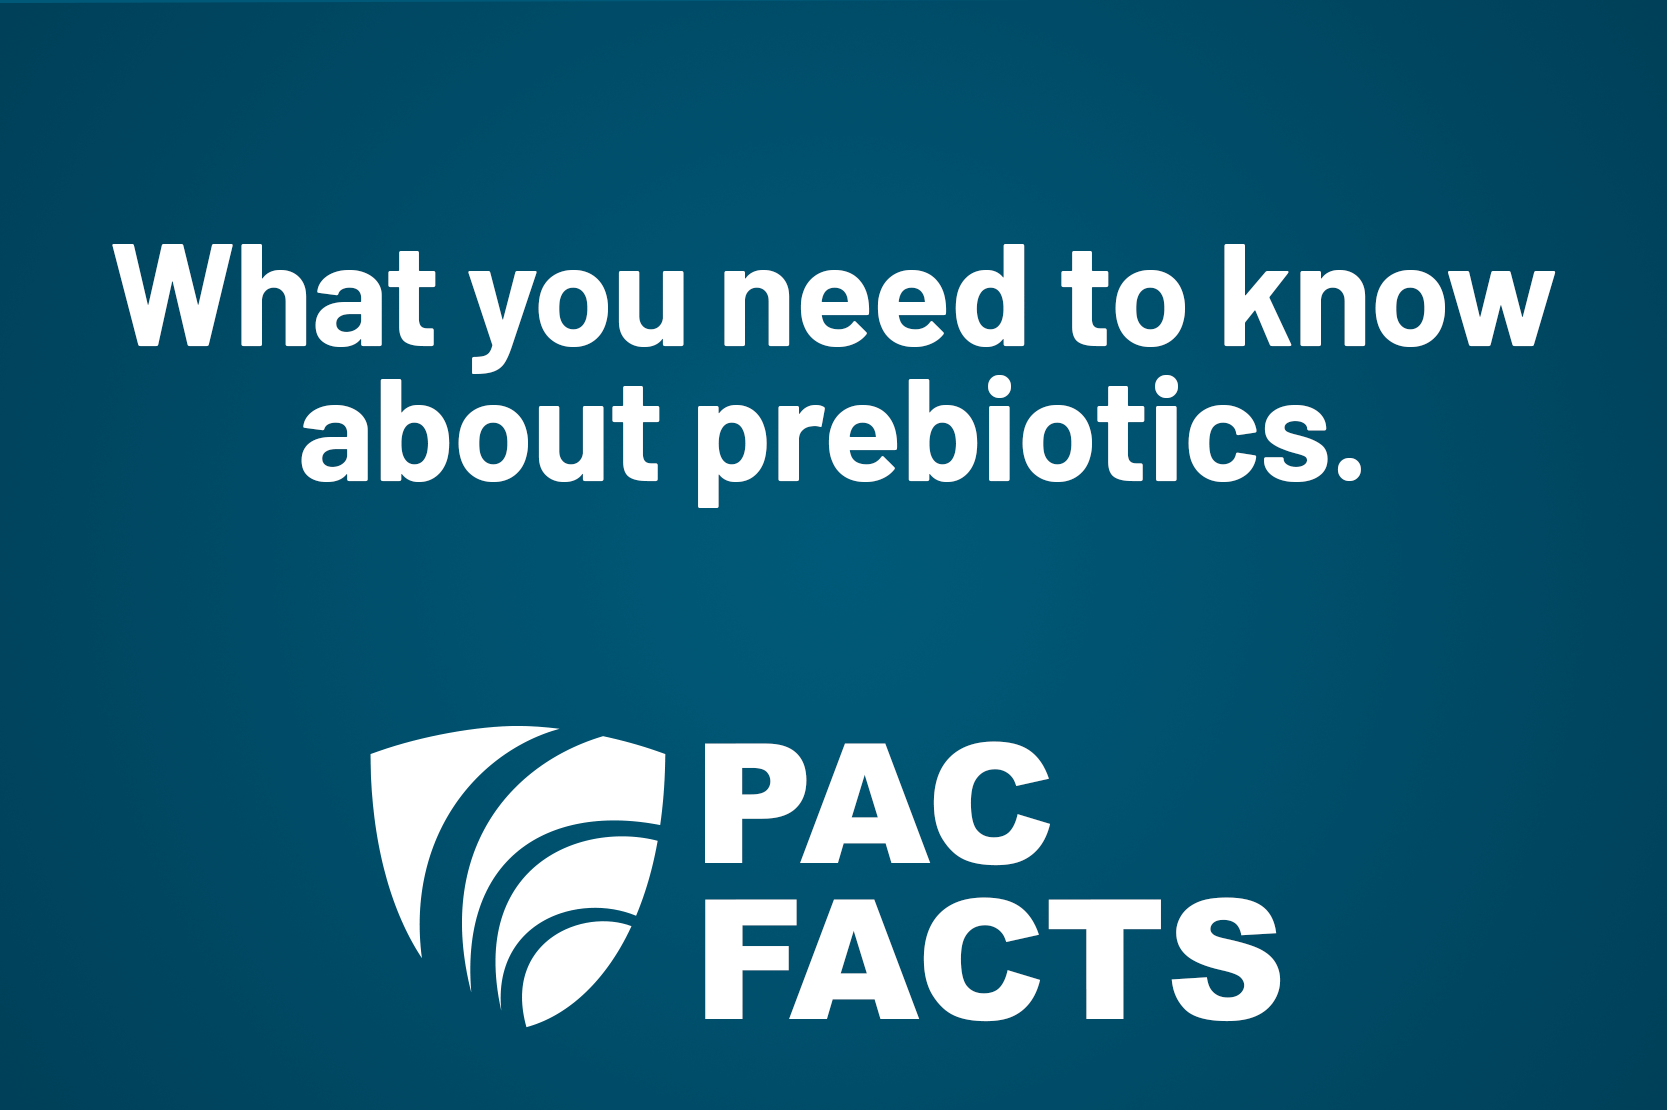 PAC Facts - What you need to know about prebiotics